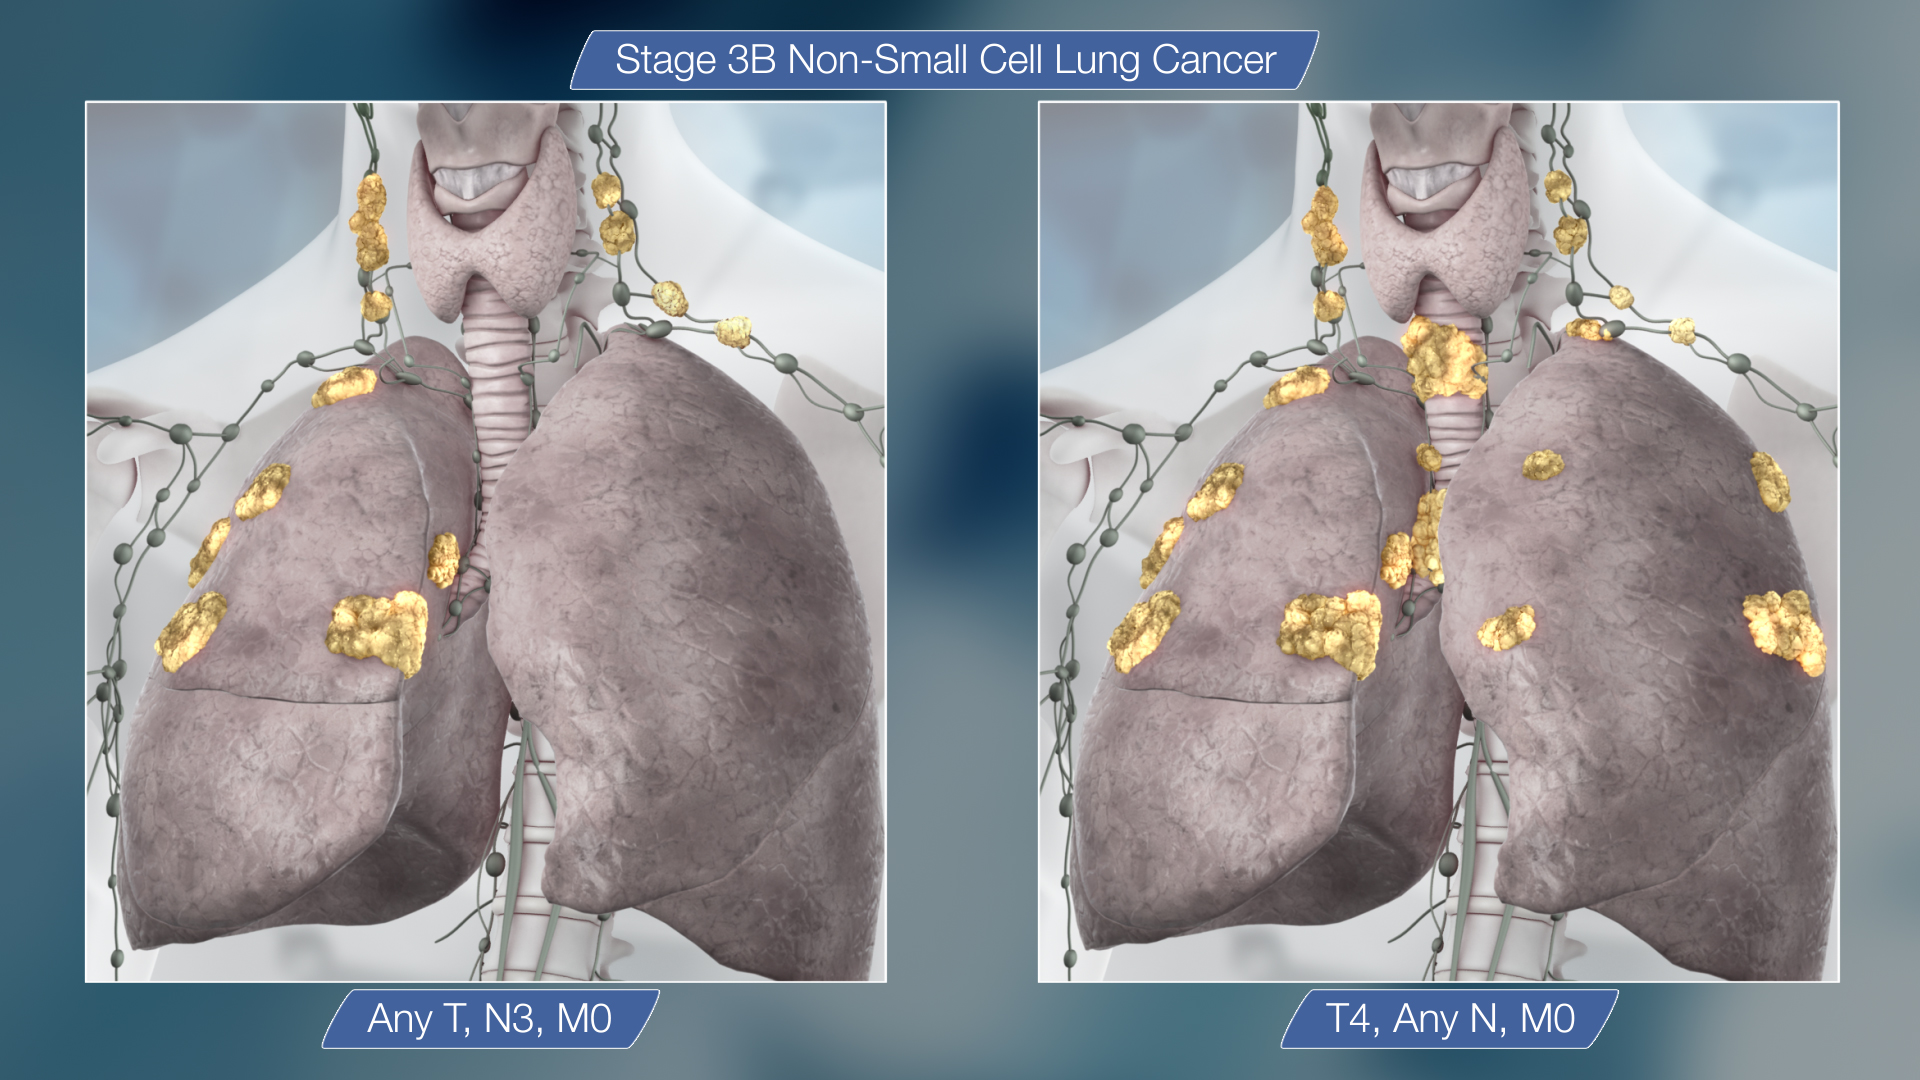 Lungs cancer - Stage 3B